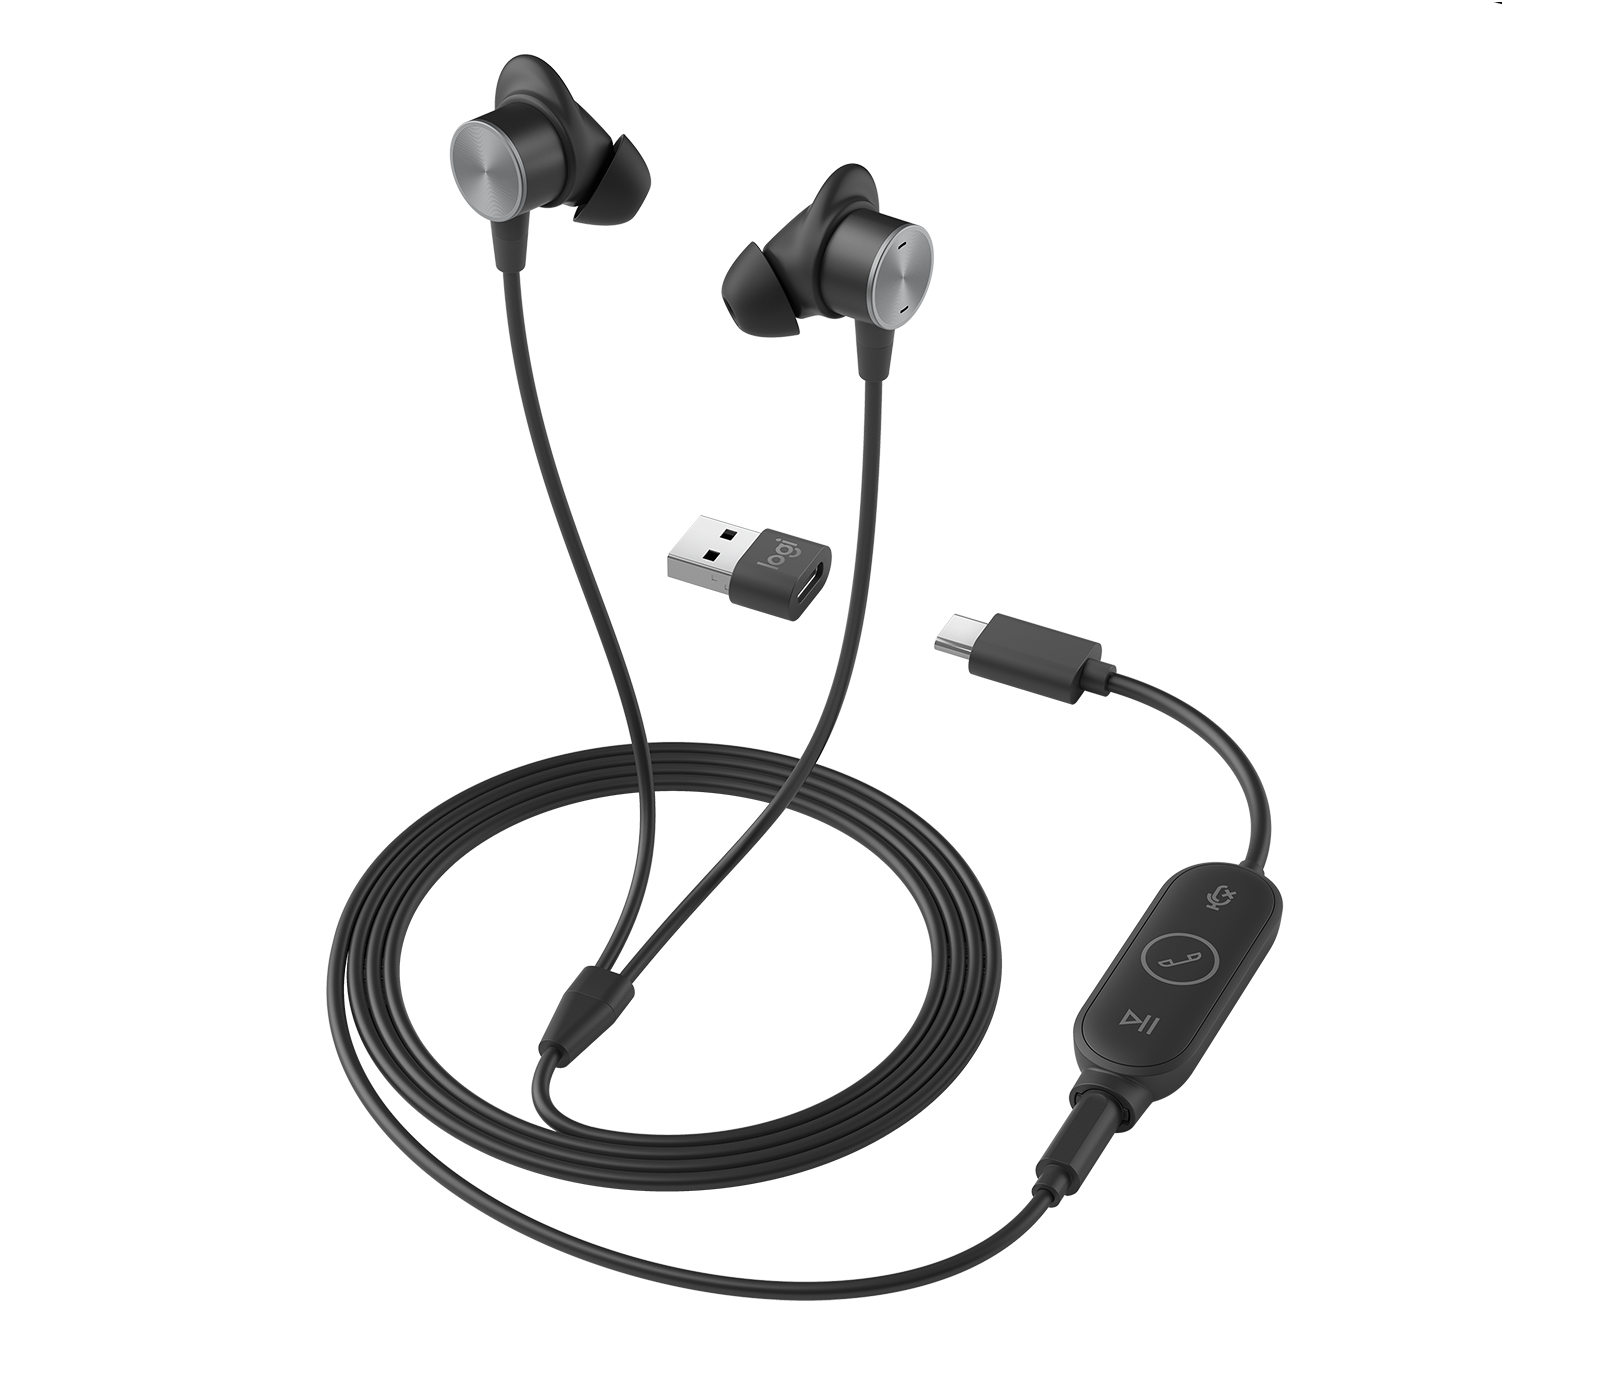 Logitech Zone Wired Earbuds - Headset - in-ear - wired - 3.5 mm jack - noise isolating - graphite - Zoom Certified, Optimized for UC